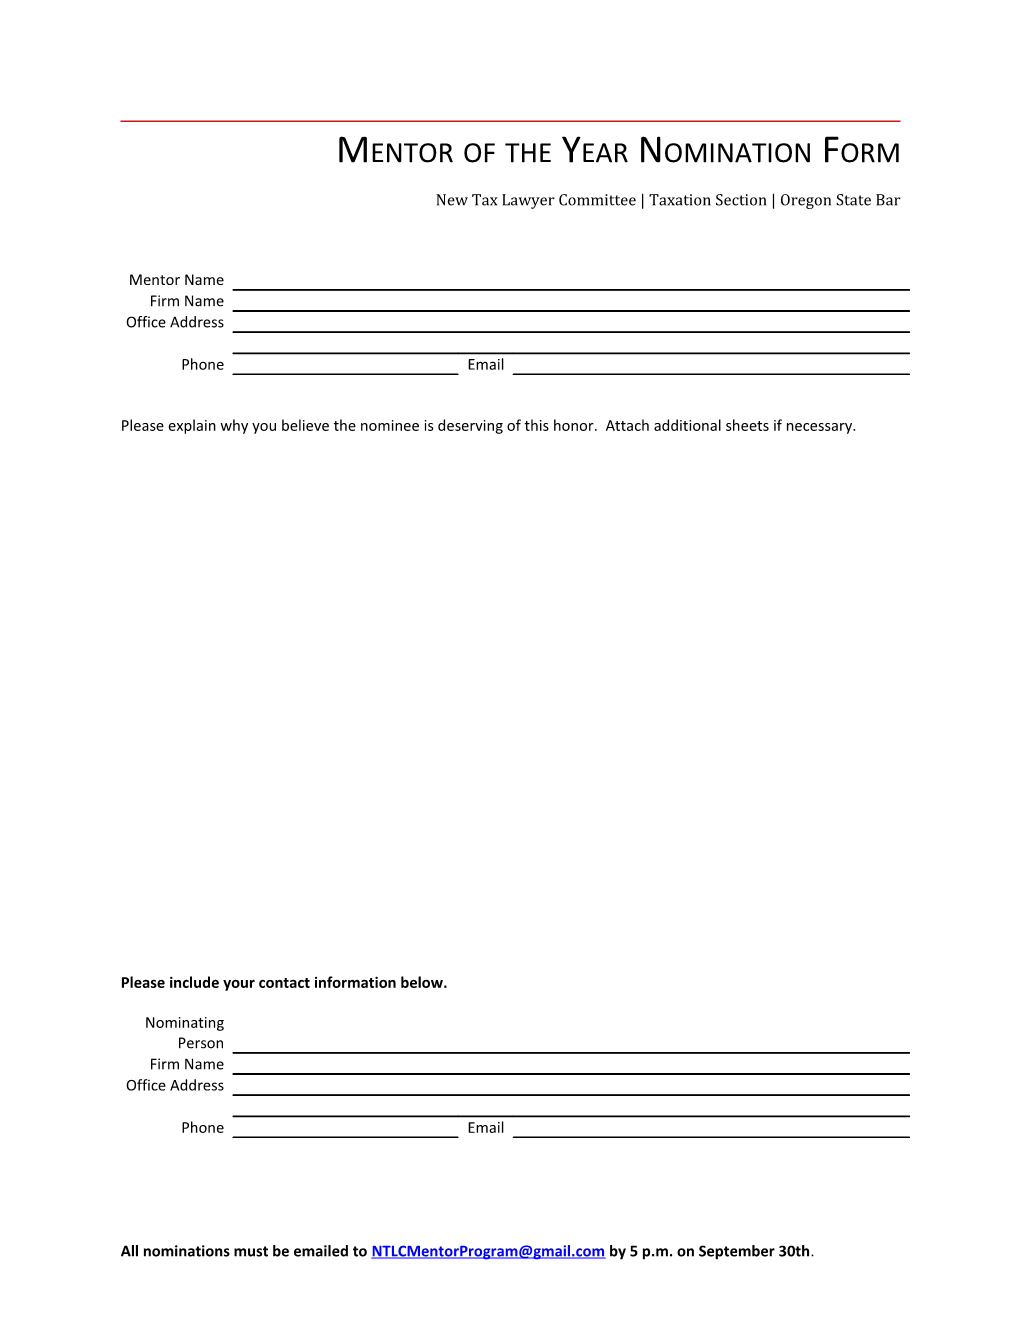 Mentor of the Year Nomination Form